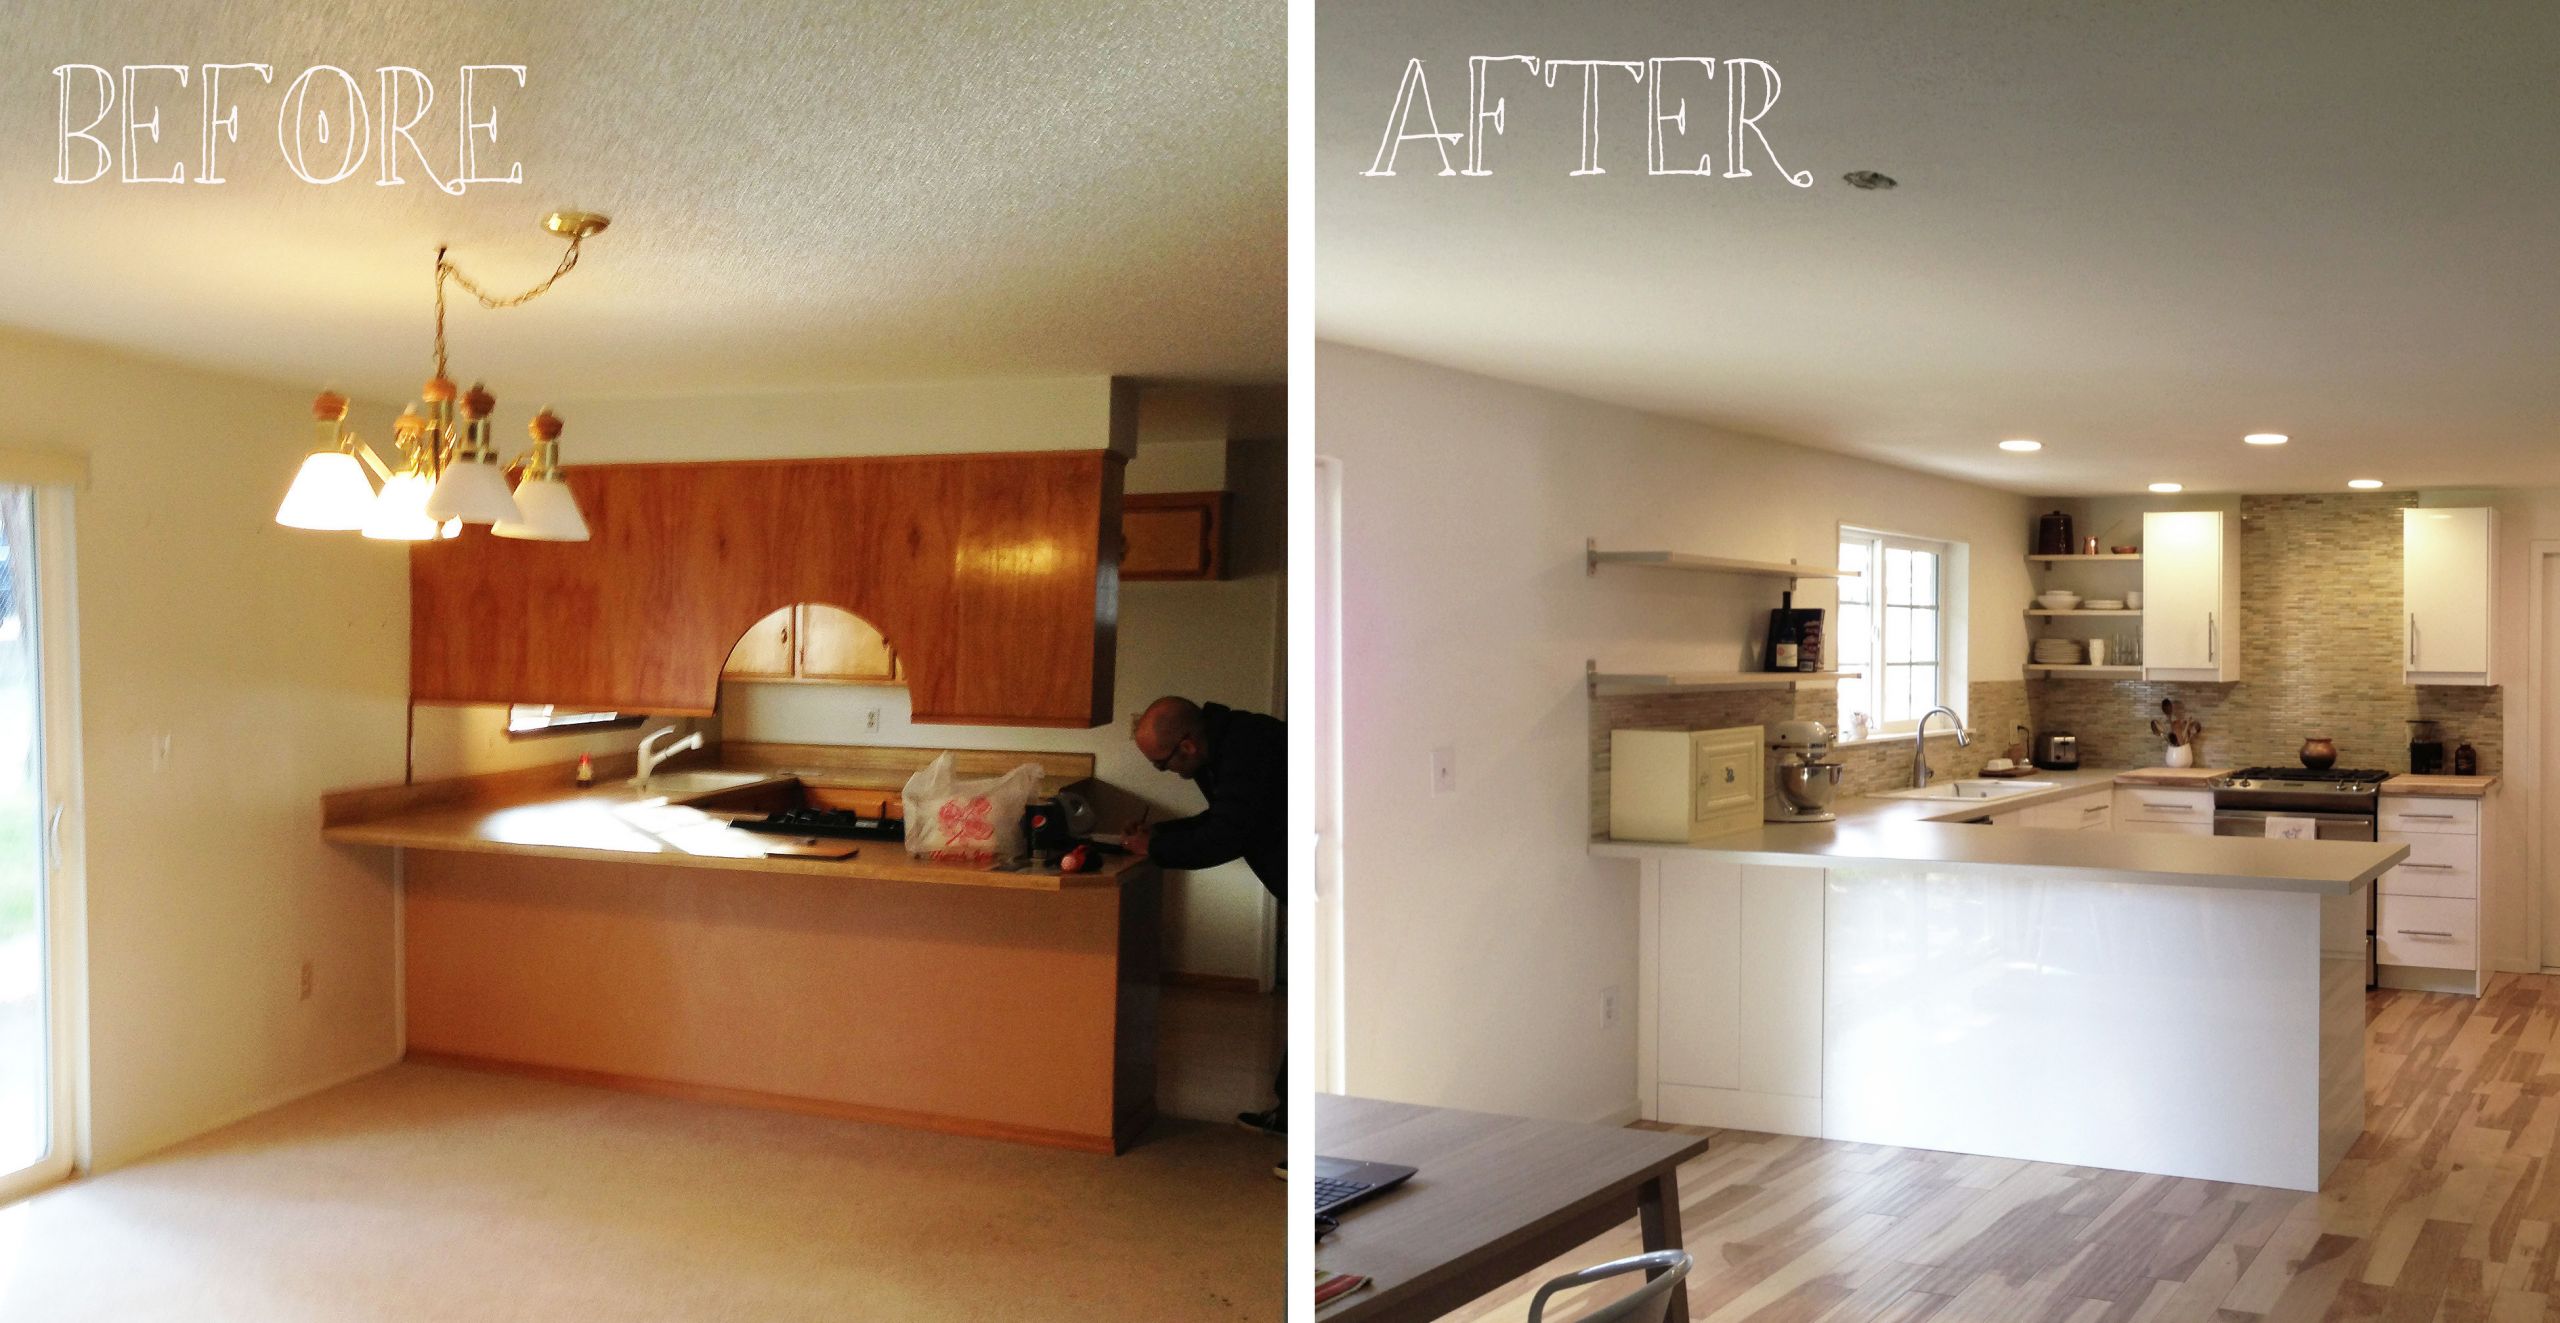 Kitchen Remodel Before And After
 kitchen remodel